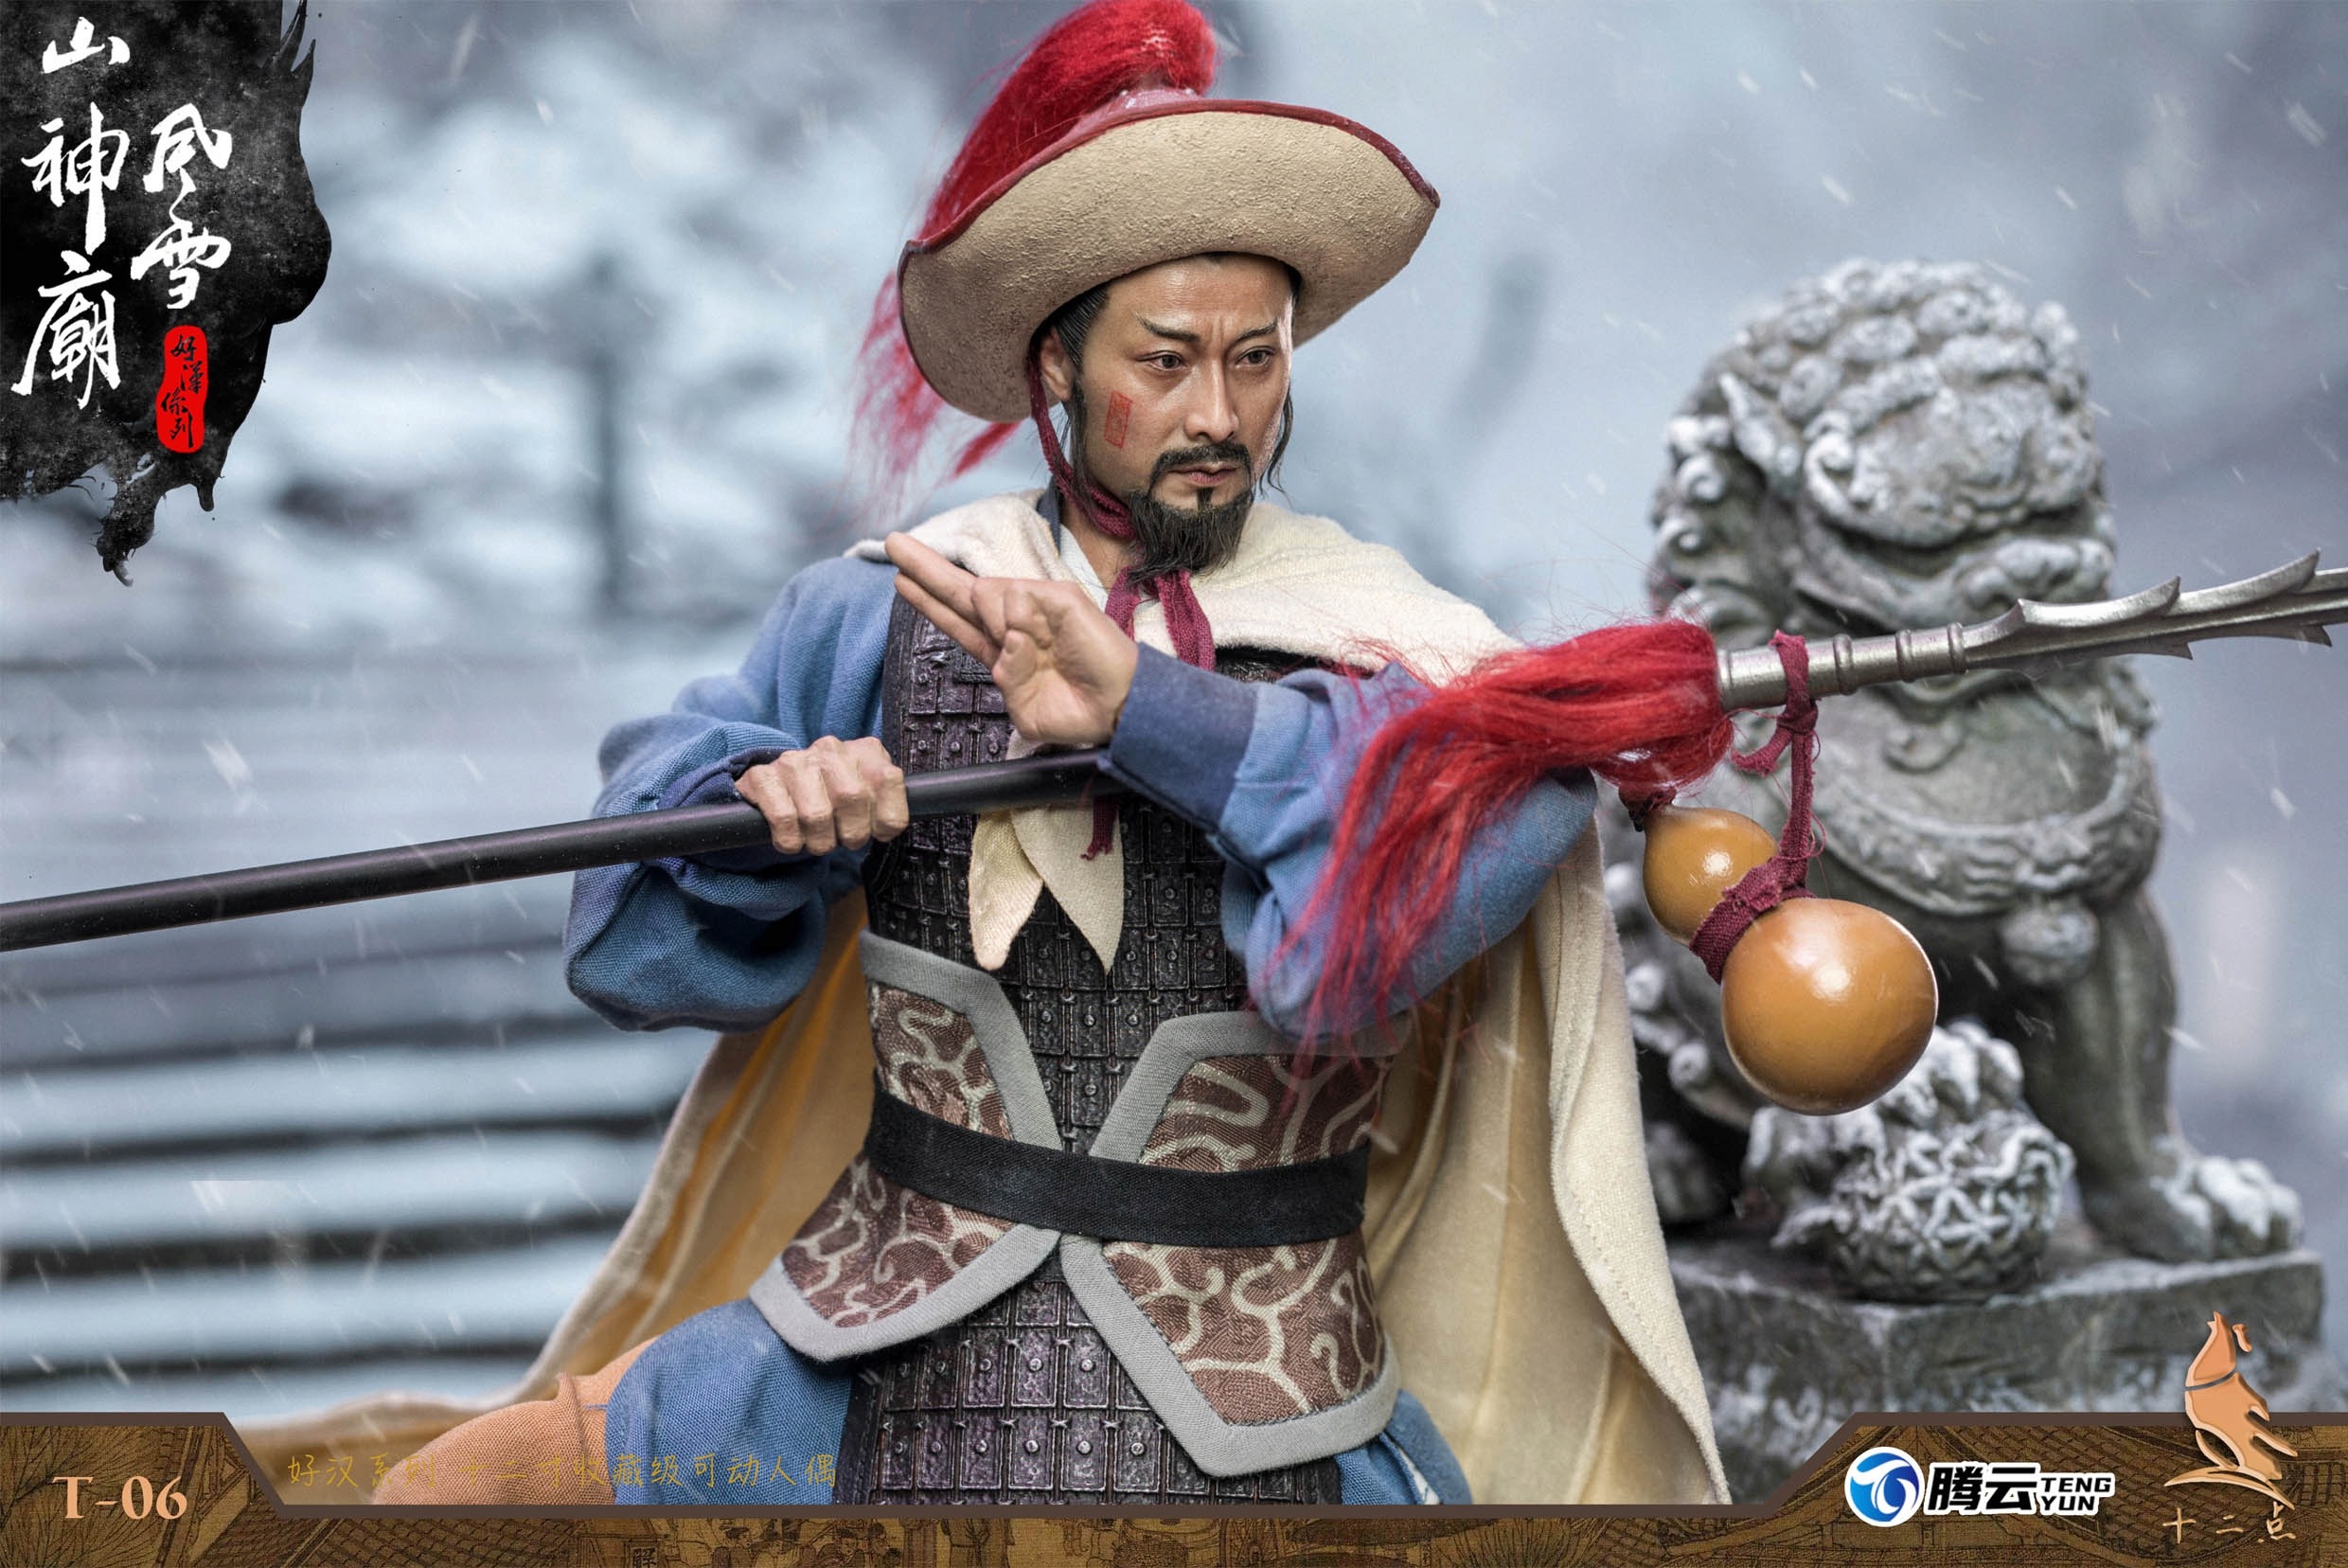 NEW PRODUCT: Twelve - Hero Series - Leopard Head Lin Chong Fengxue Mountain Temple Action Figure (T-05 /T-06) 2629